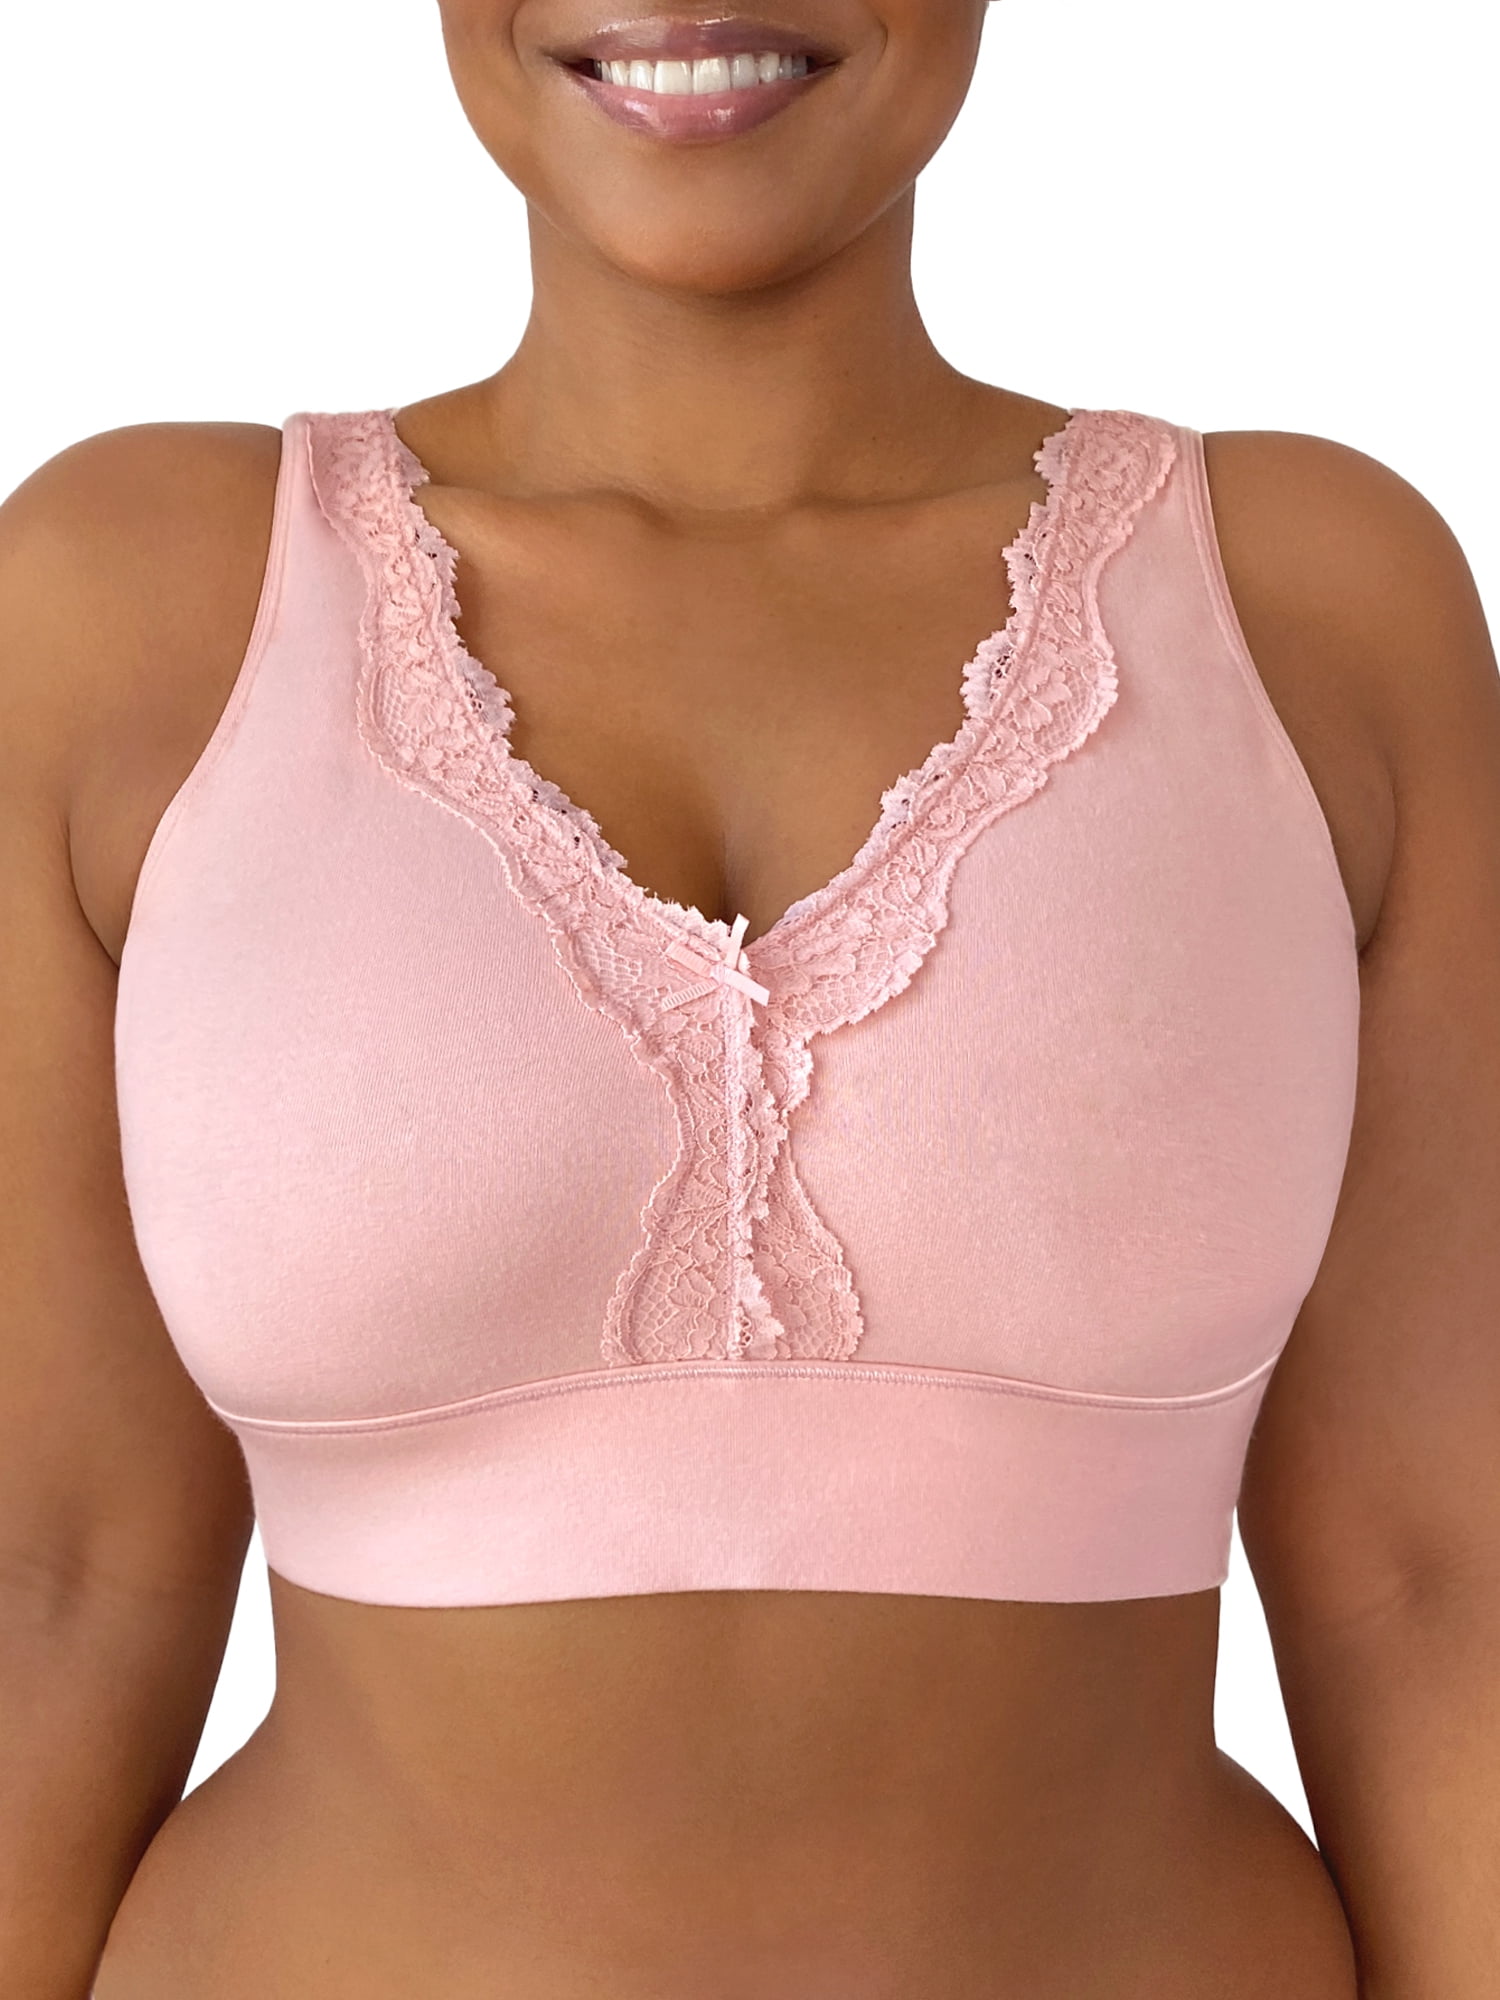 Fruit Of the Loom Smoothing Back Sports Bra FT662 NWT